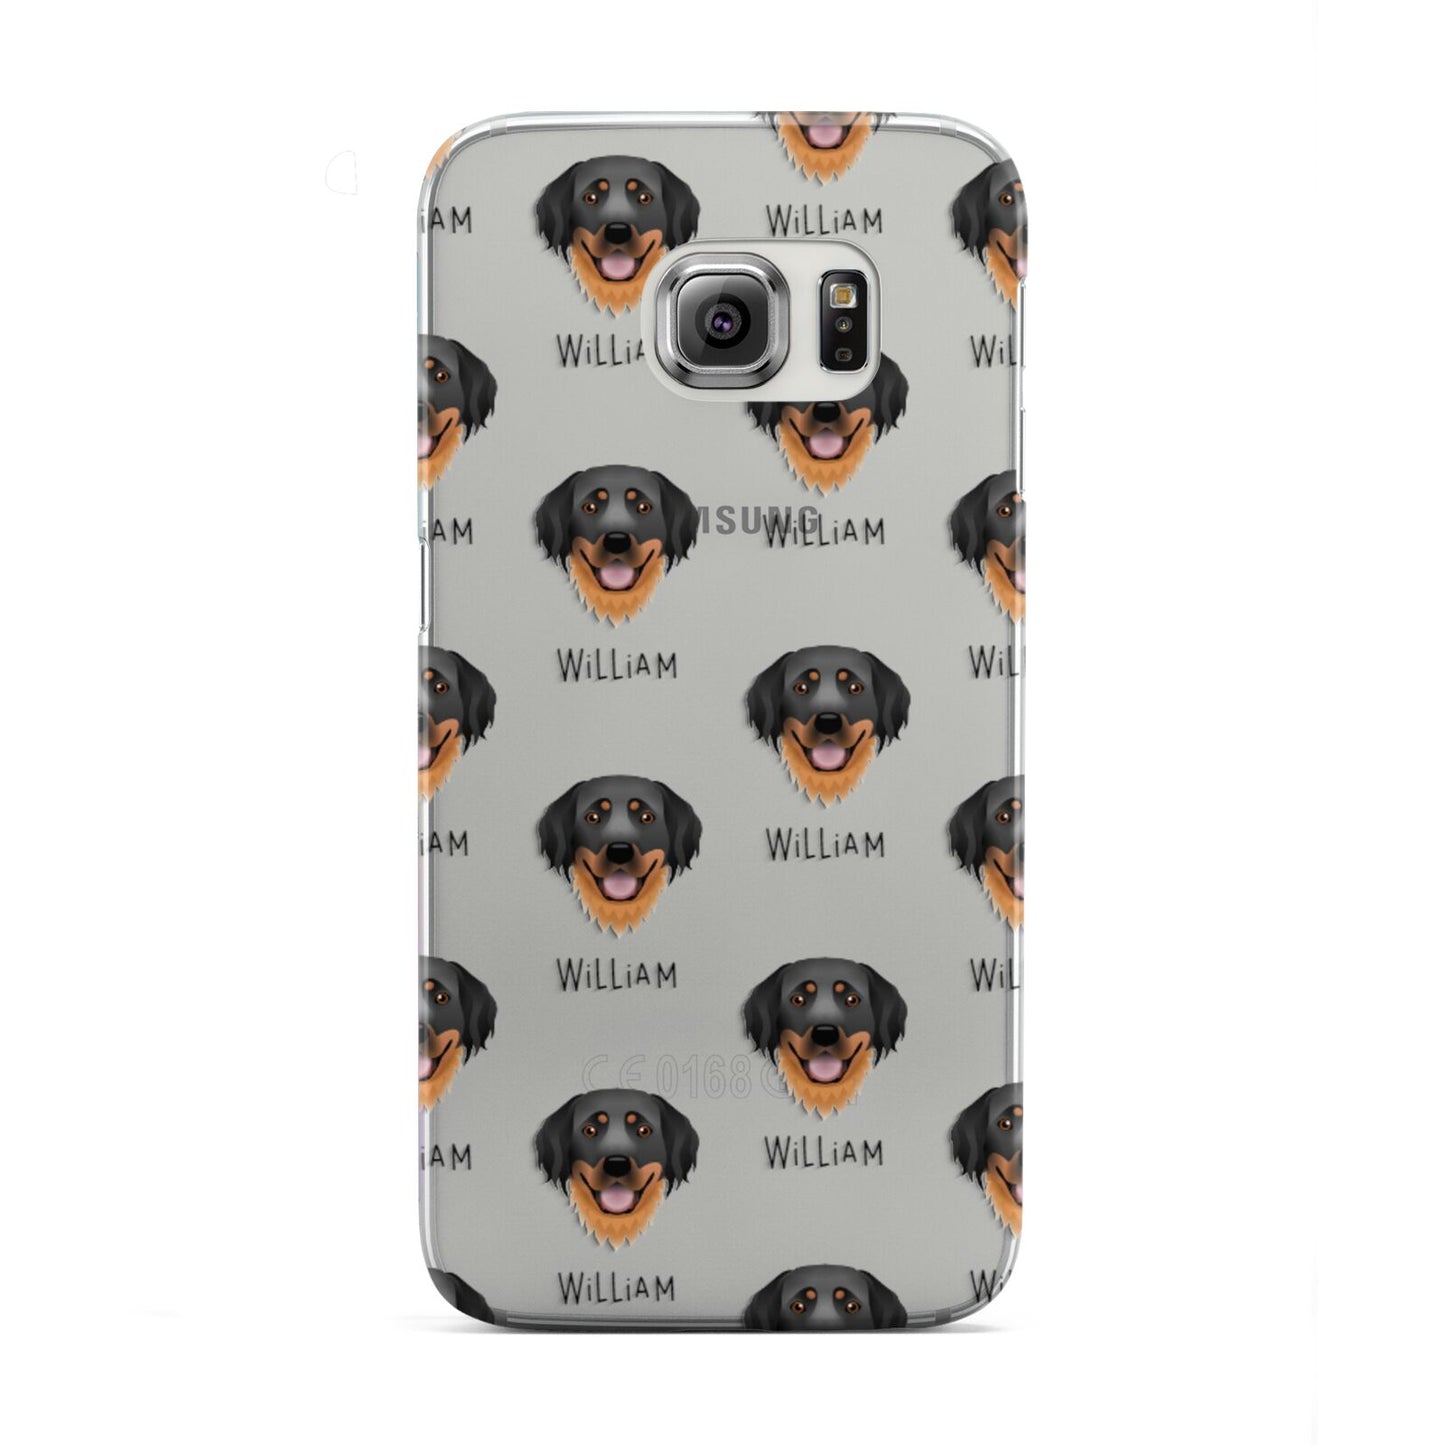 Hovawart Icon with Name Samsung Galaxy S6 Edge Case